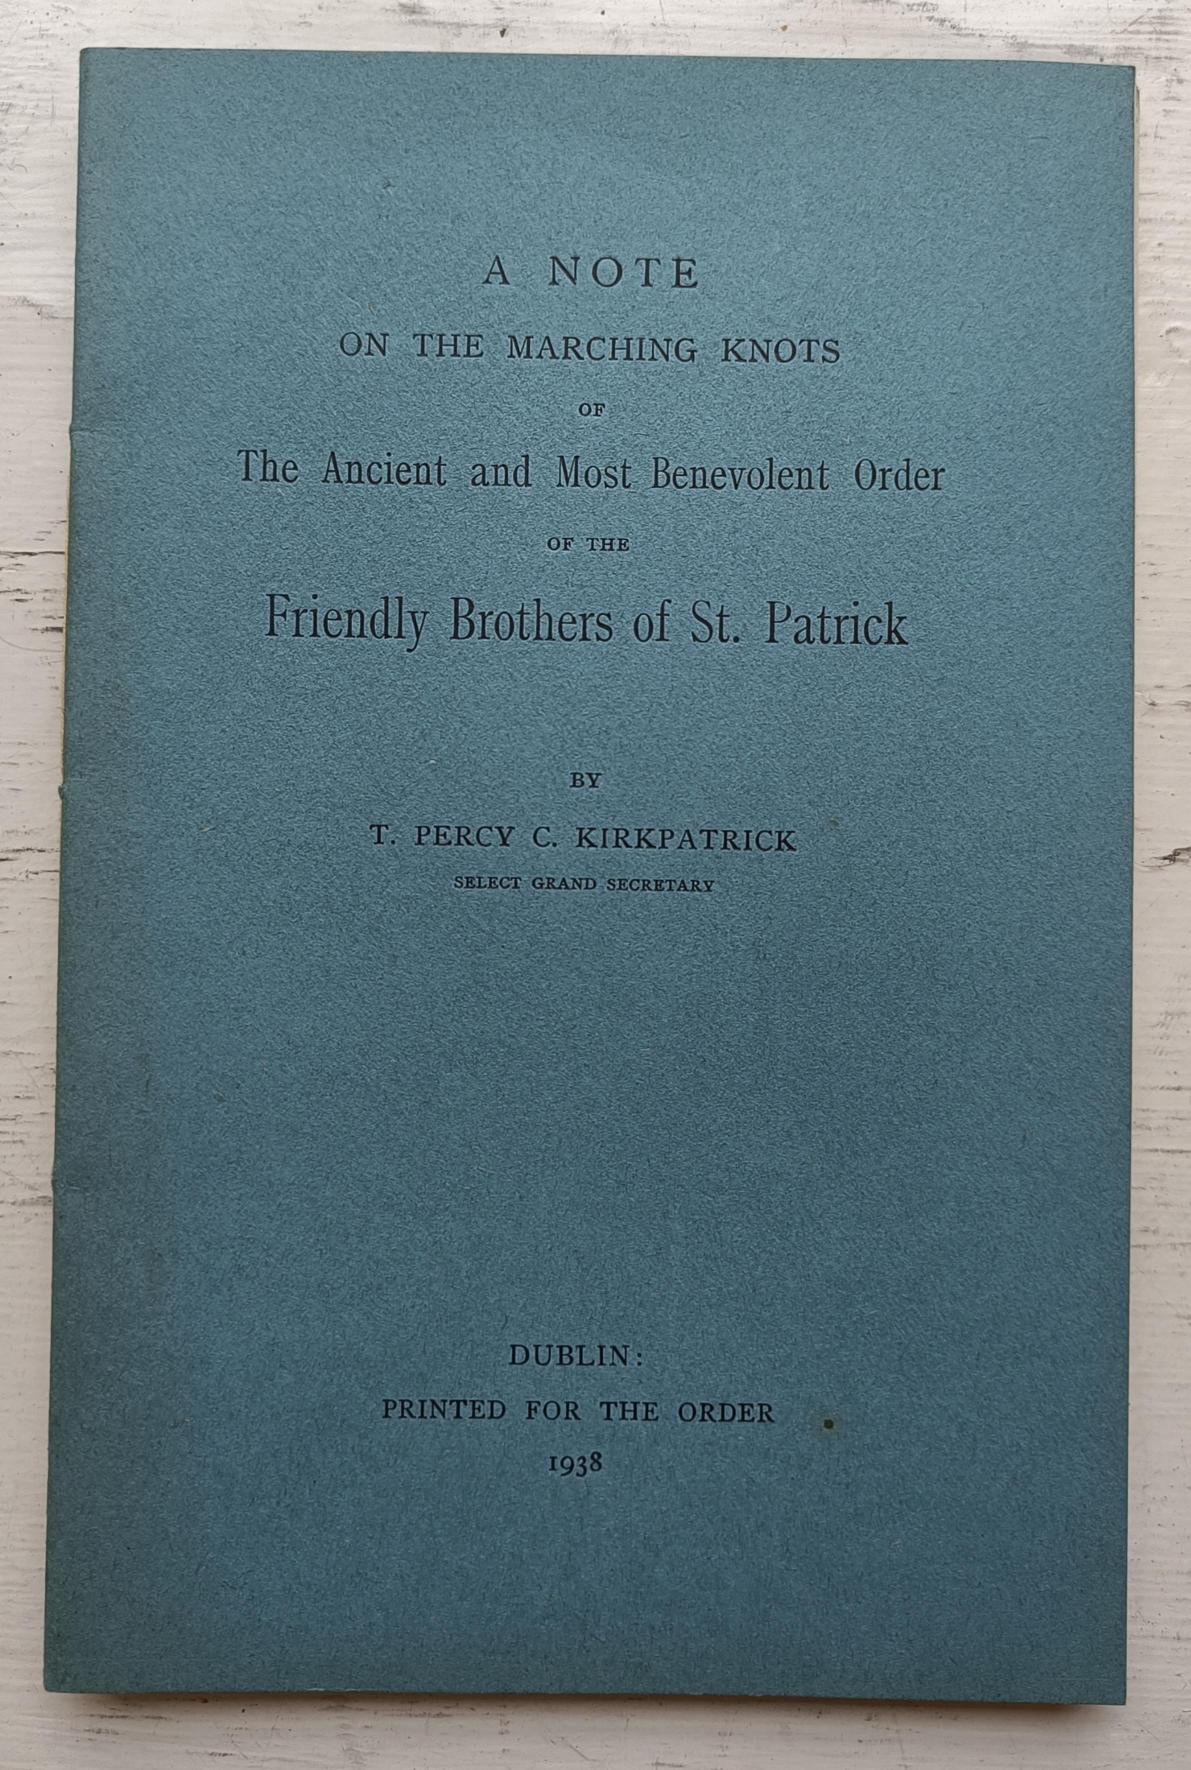 A Note on the Marching Knots of The Ancient and Most Benevolent Order of the Friendly Brothers of St. Patrick - T. Percy C. Kirkpatrick